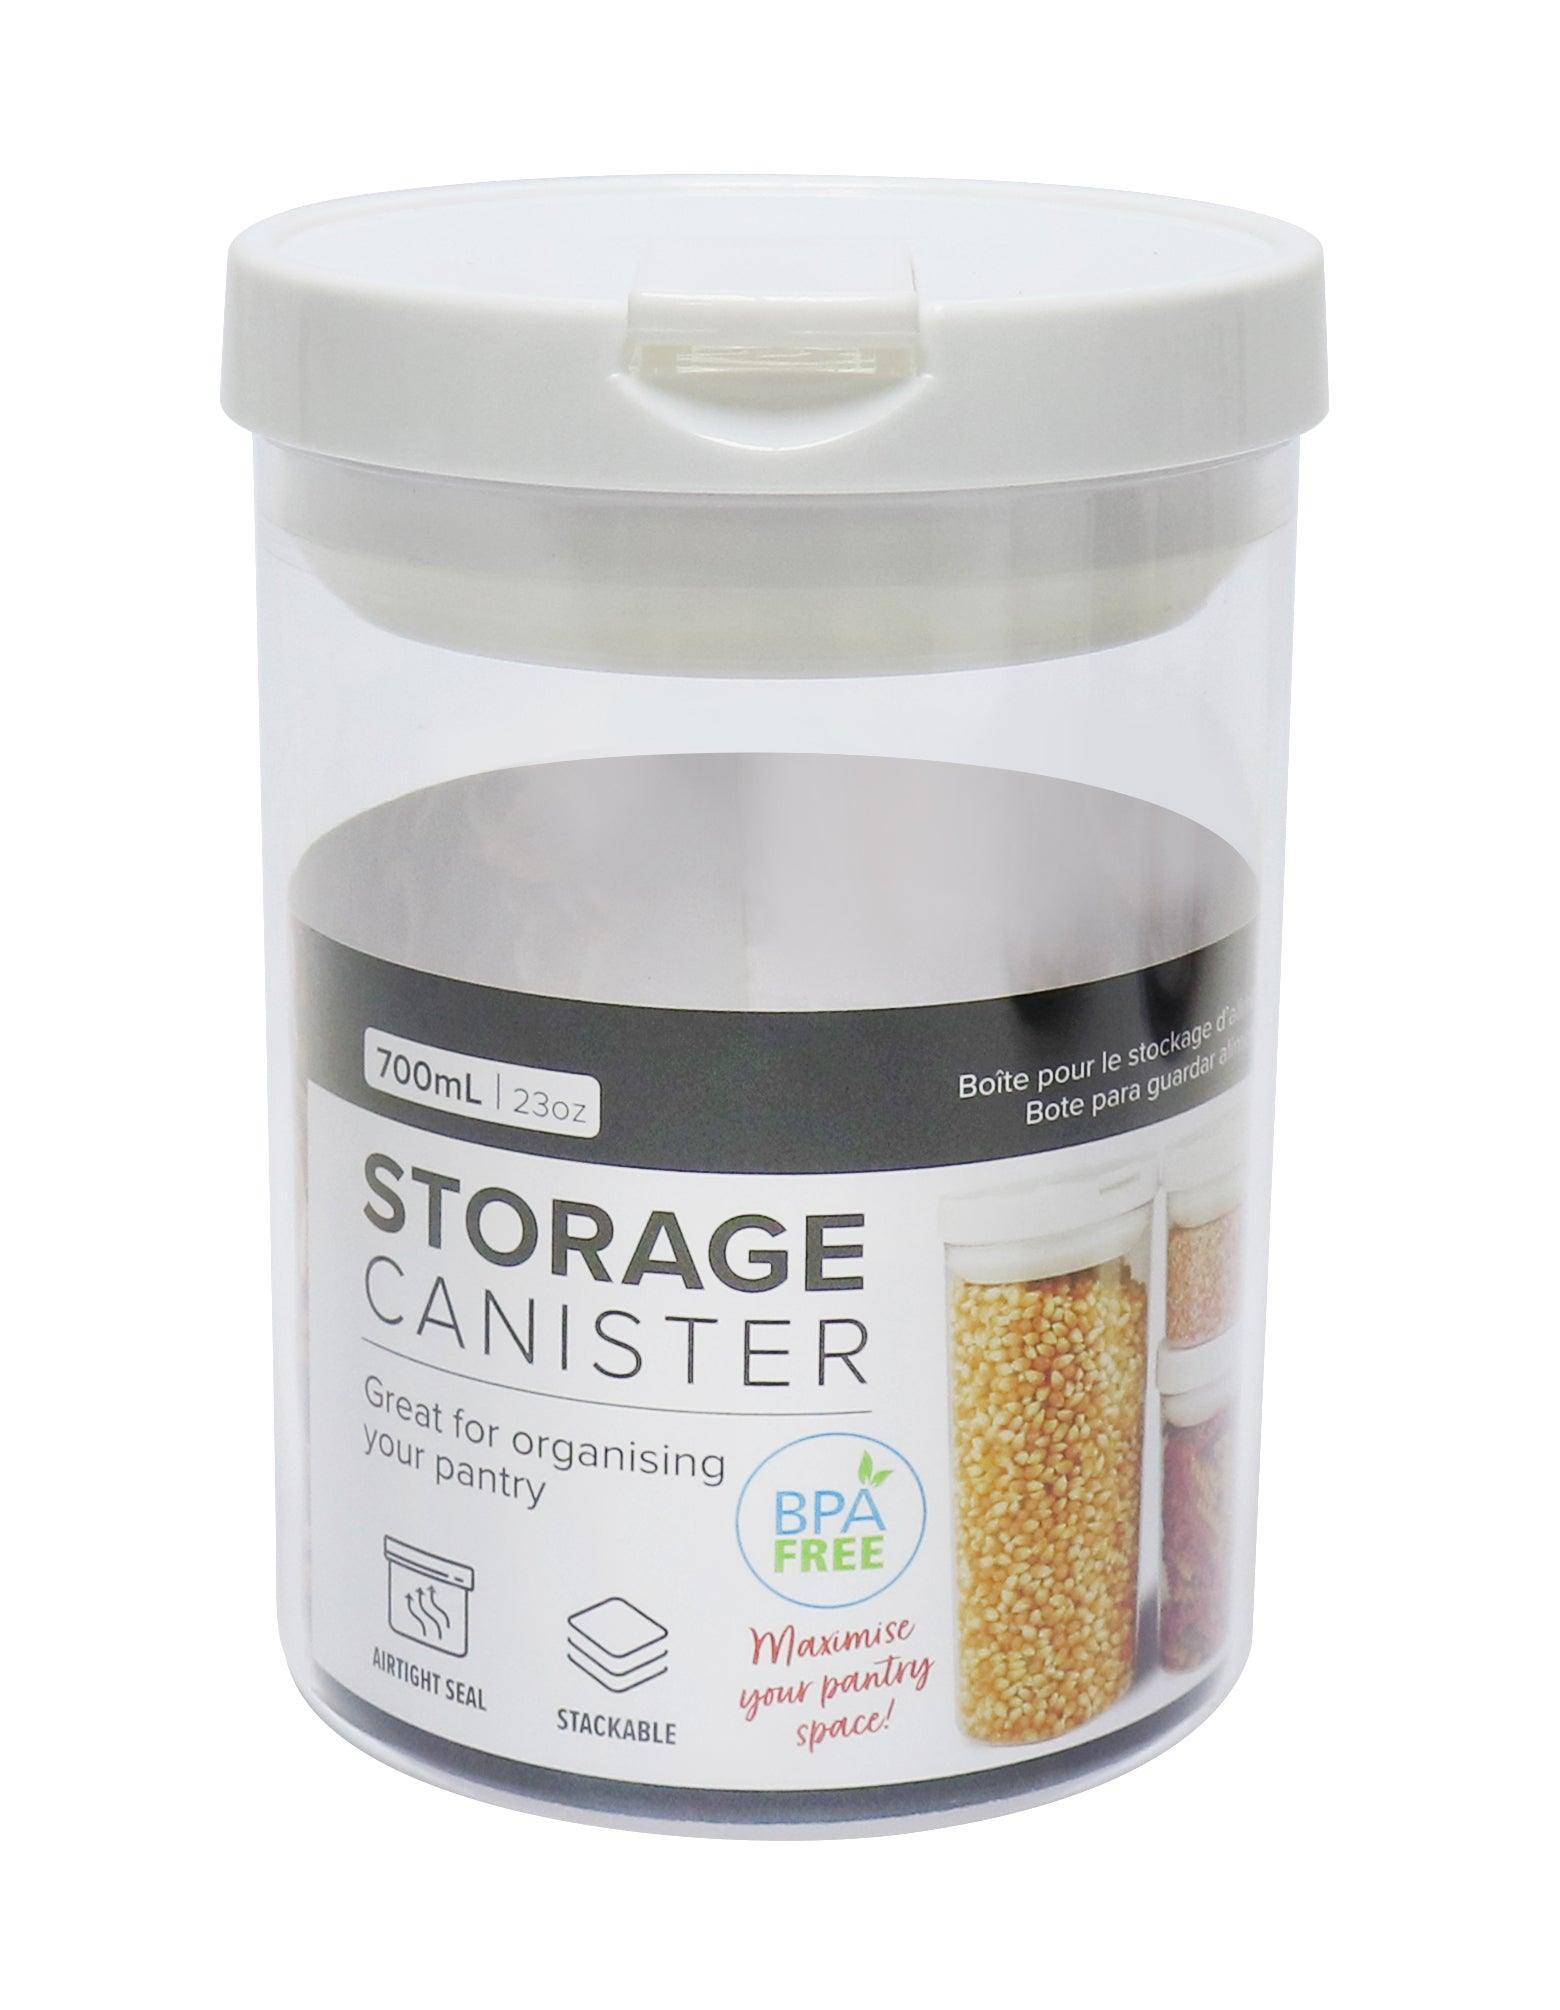 UBL | Round Storage Canister | 700ml - Choice Stores